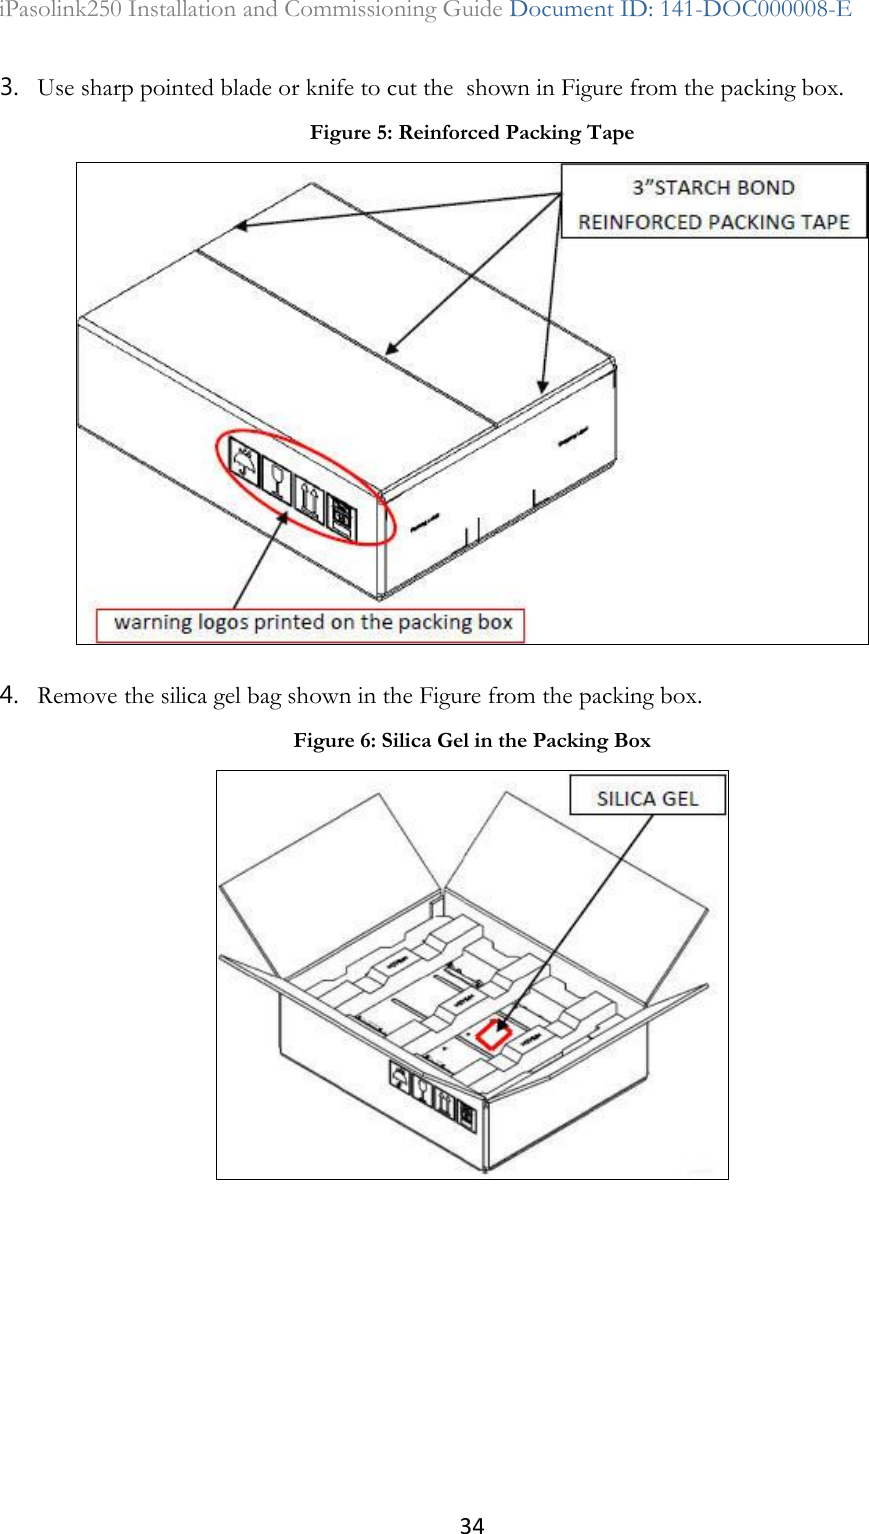 34 iPasolink250 Installation and Commissioning Guide Document ID: 141-DOC000008-E  3. Use sharp pointed blade or knife to cut the  shown in Figure from the packing box. 4. Remove the silica gel bag shown in the Figure from the packing box. Figure 5: Reinforced Packing Tape  Figure 6: Silica Gel in the Packing Box  